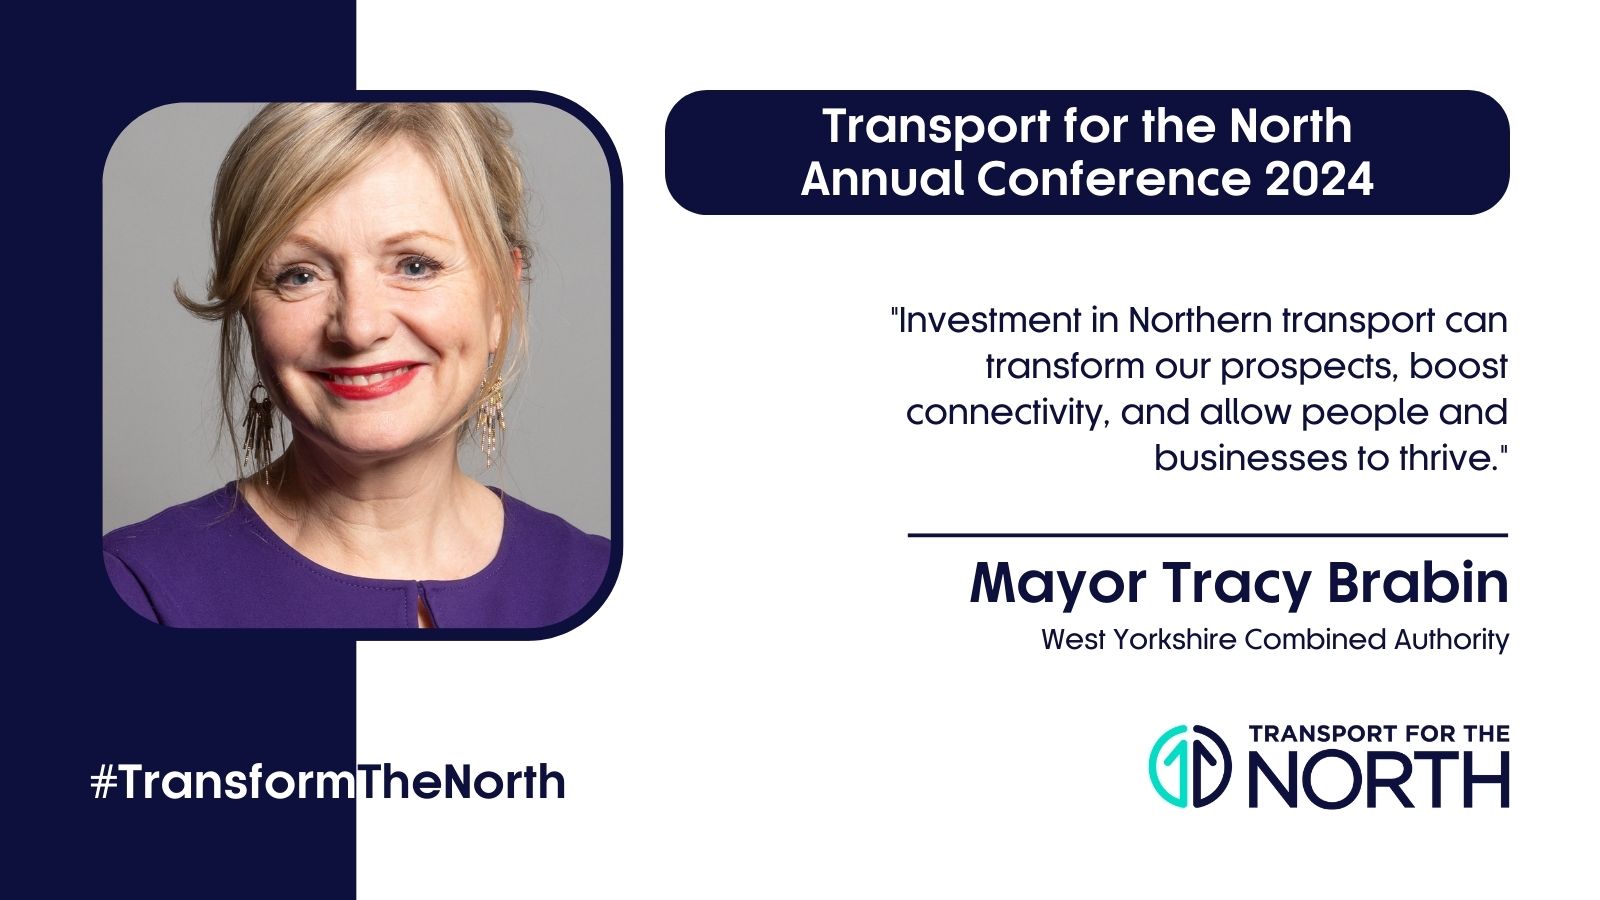 Mayor Tracy Brabin ahead of TfN's Annual Conference 2024